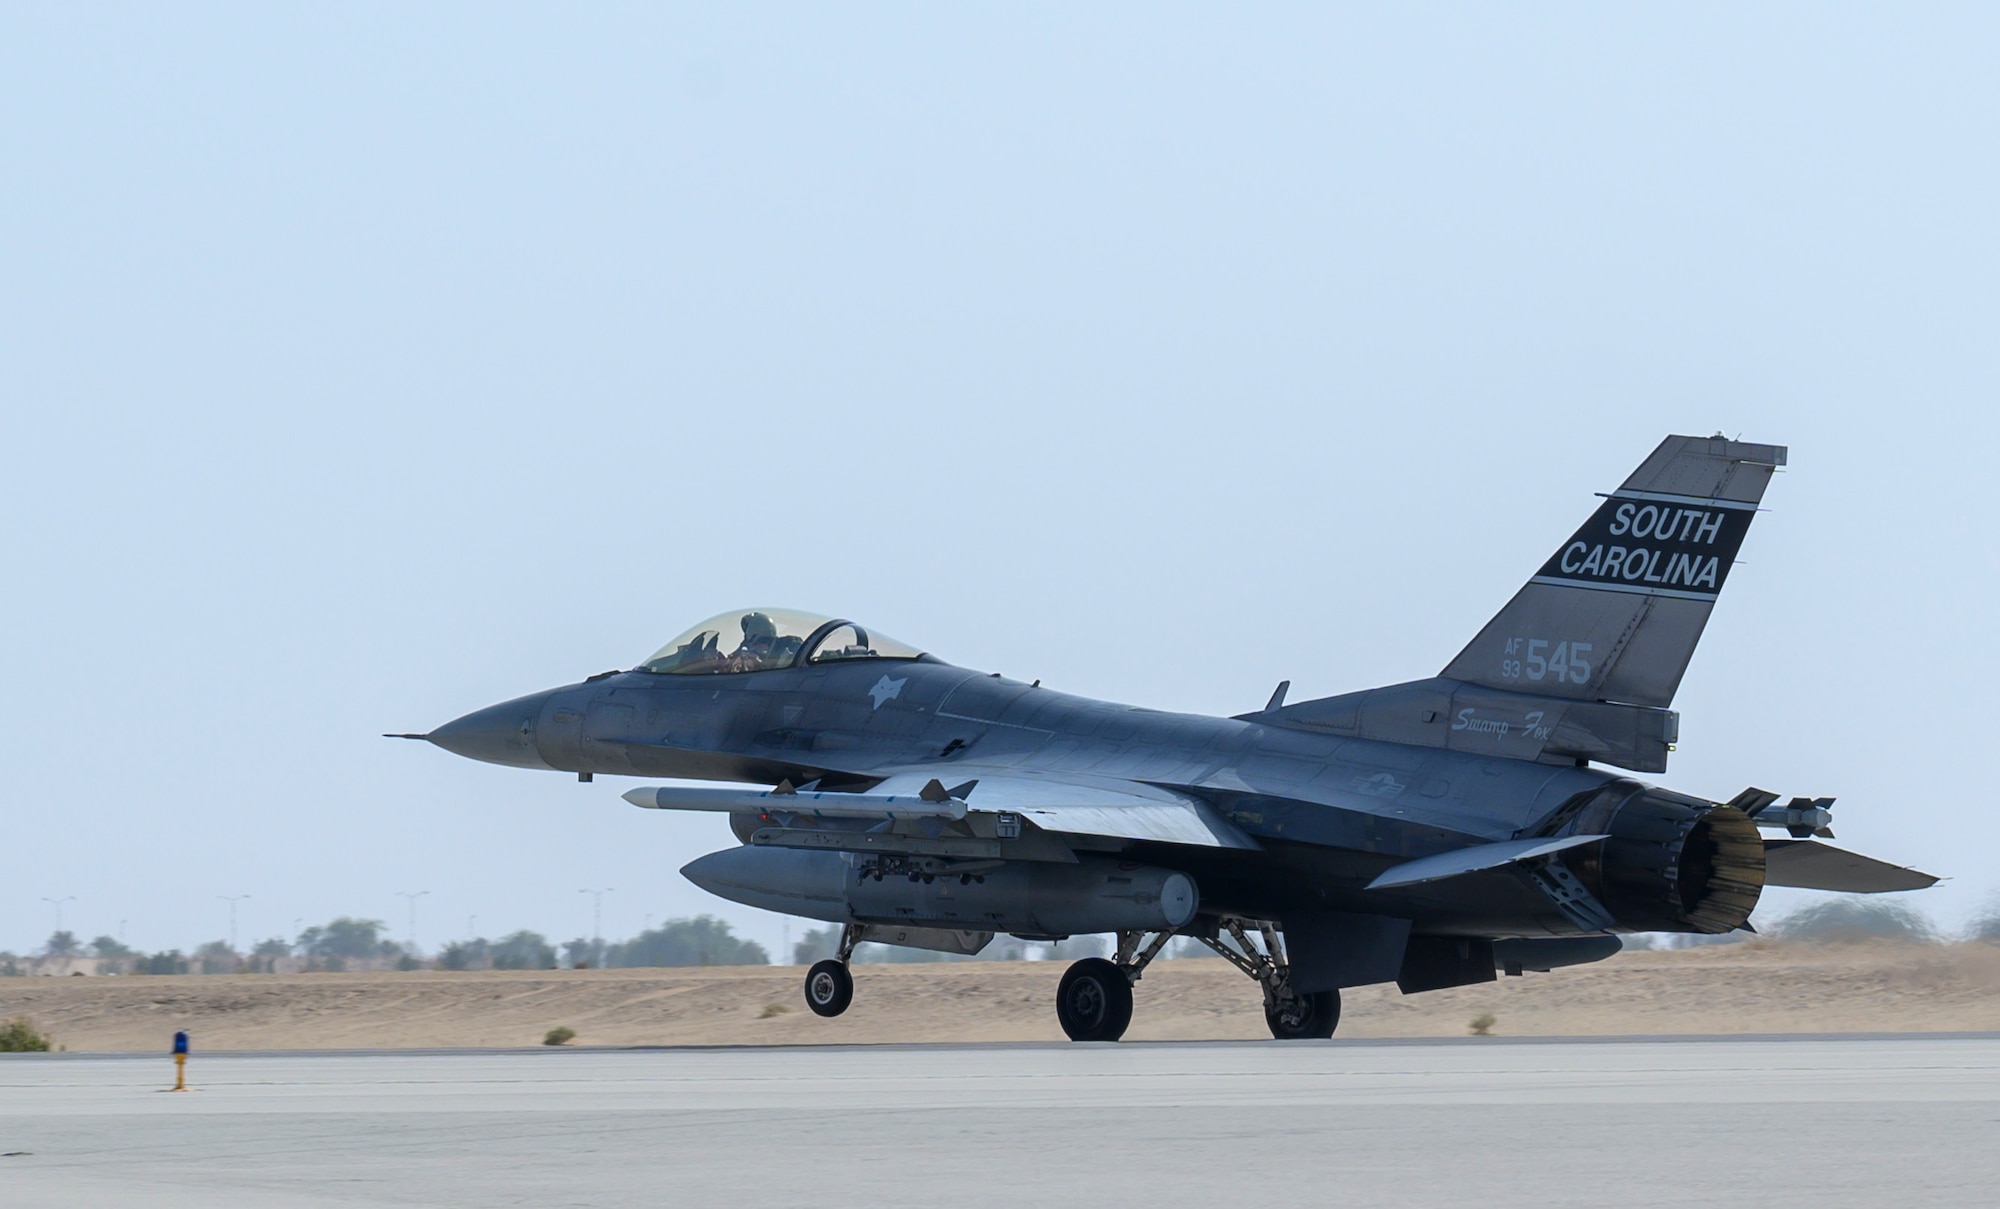 A U.S. Air Force F-16CJ Fighting Falcon from South Carolina Air National Guard’s 169th“Swamp Fox” Fighter Wing lands on the flight line at Prince Sultan Air Base, Kingdom of Saudi Arabia, April 14, 2021. The Swamp Fox team has been deployed to PSAB to help bolster the defensive capabilities against potential threats in the region. (U.S. Air Force Photo by Senior Airman Samuel Earick)